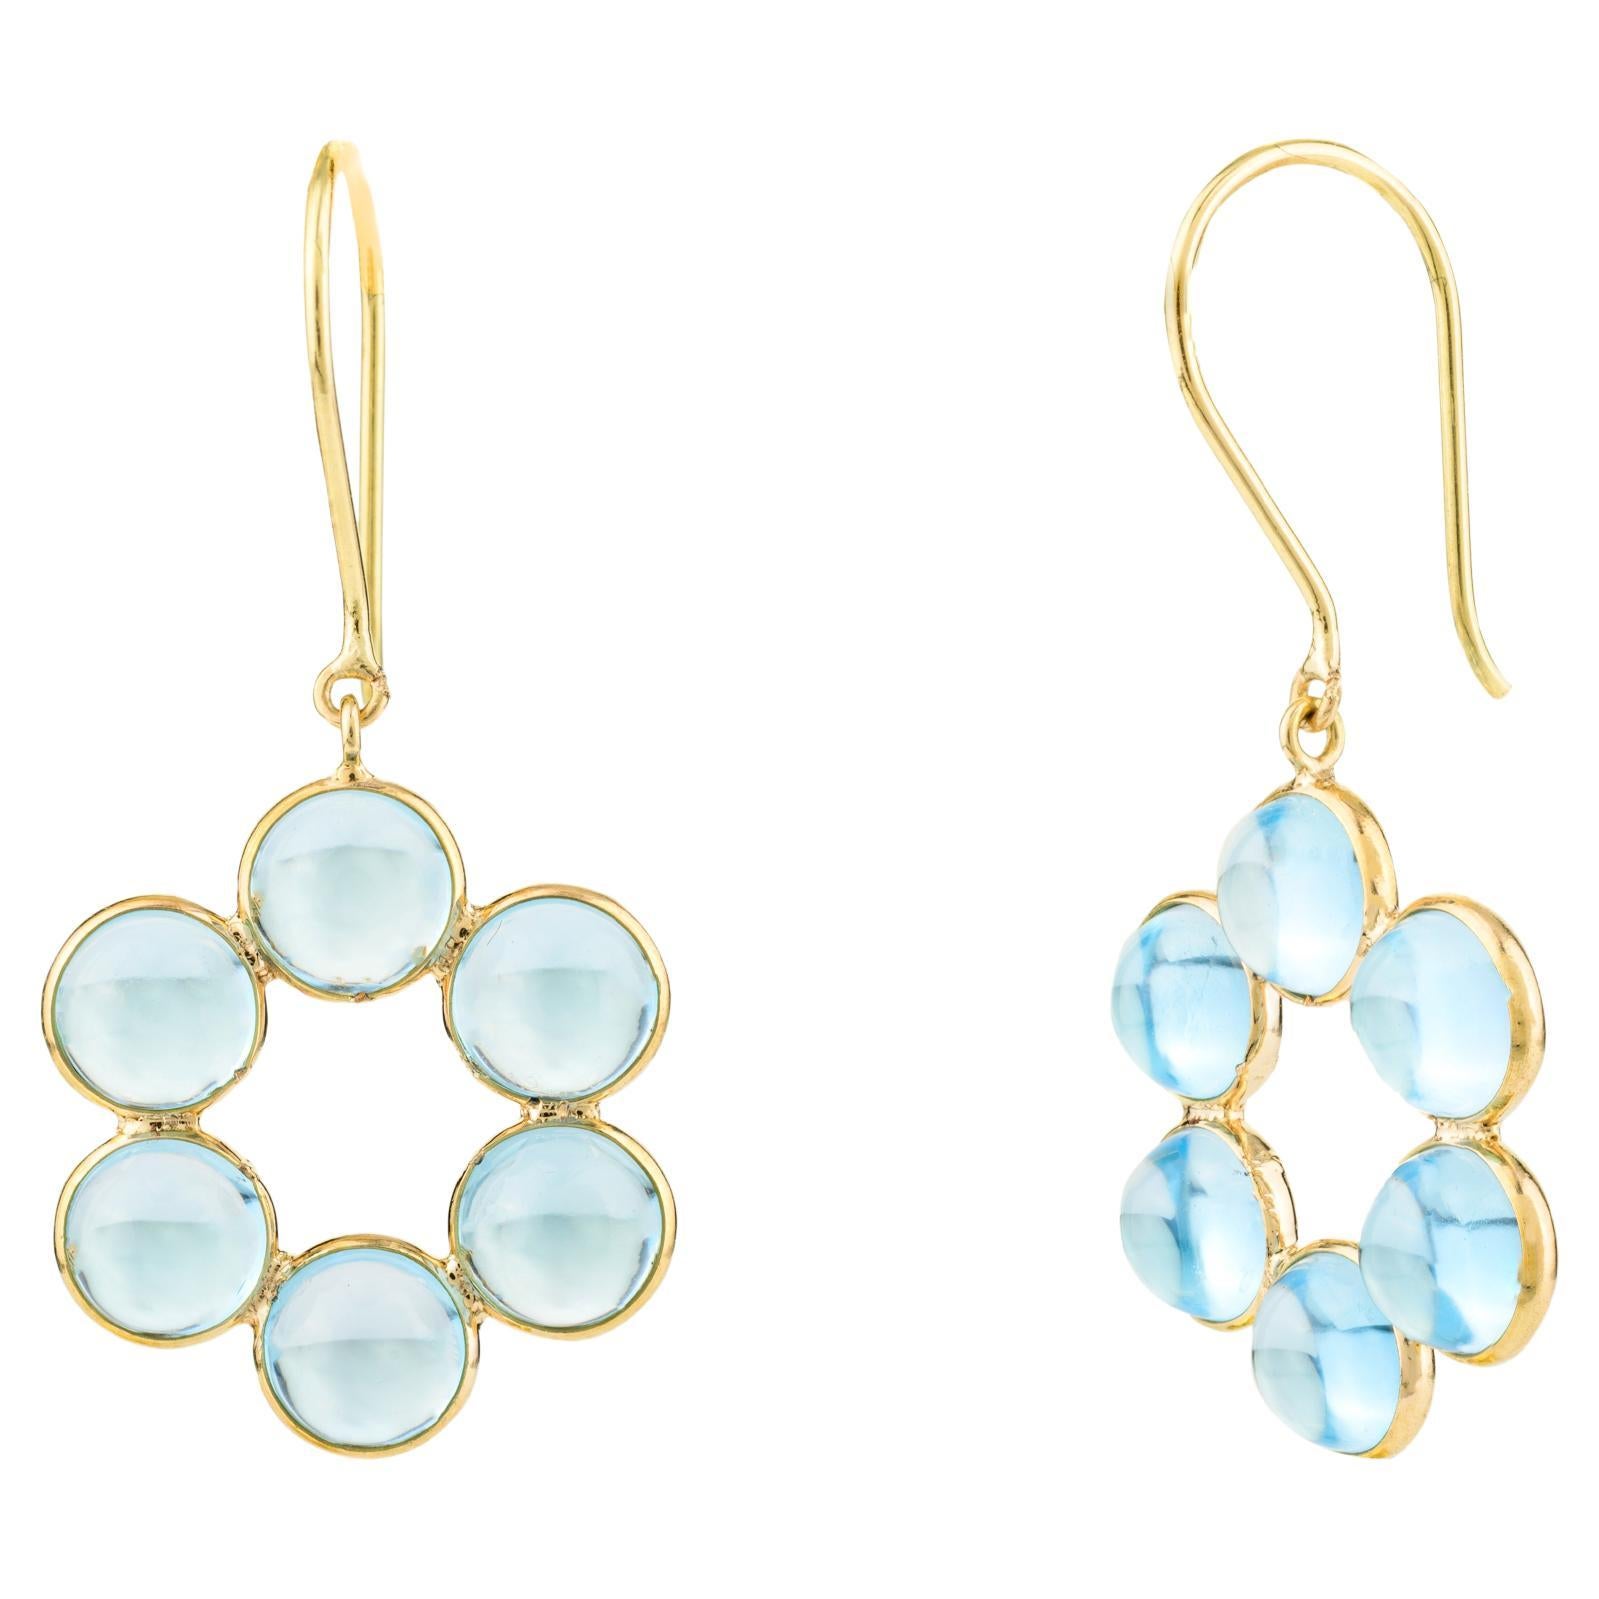 18k Solid Yellow Gold Round Blue Topaz Flower Drop Earrings Gift for Her